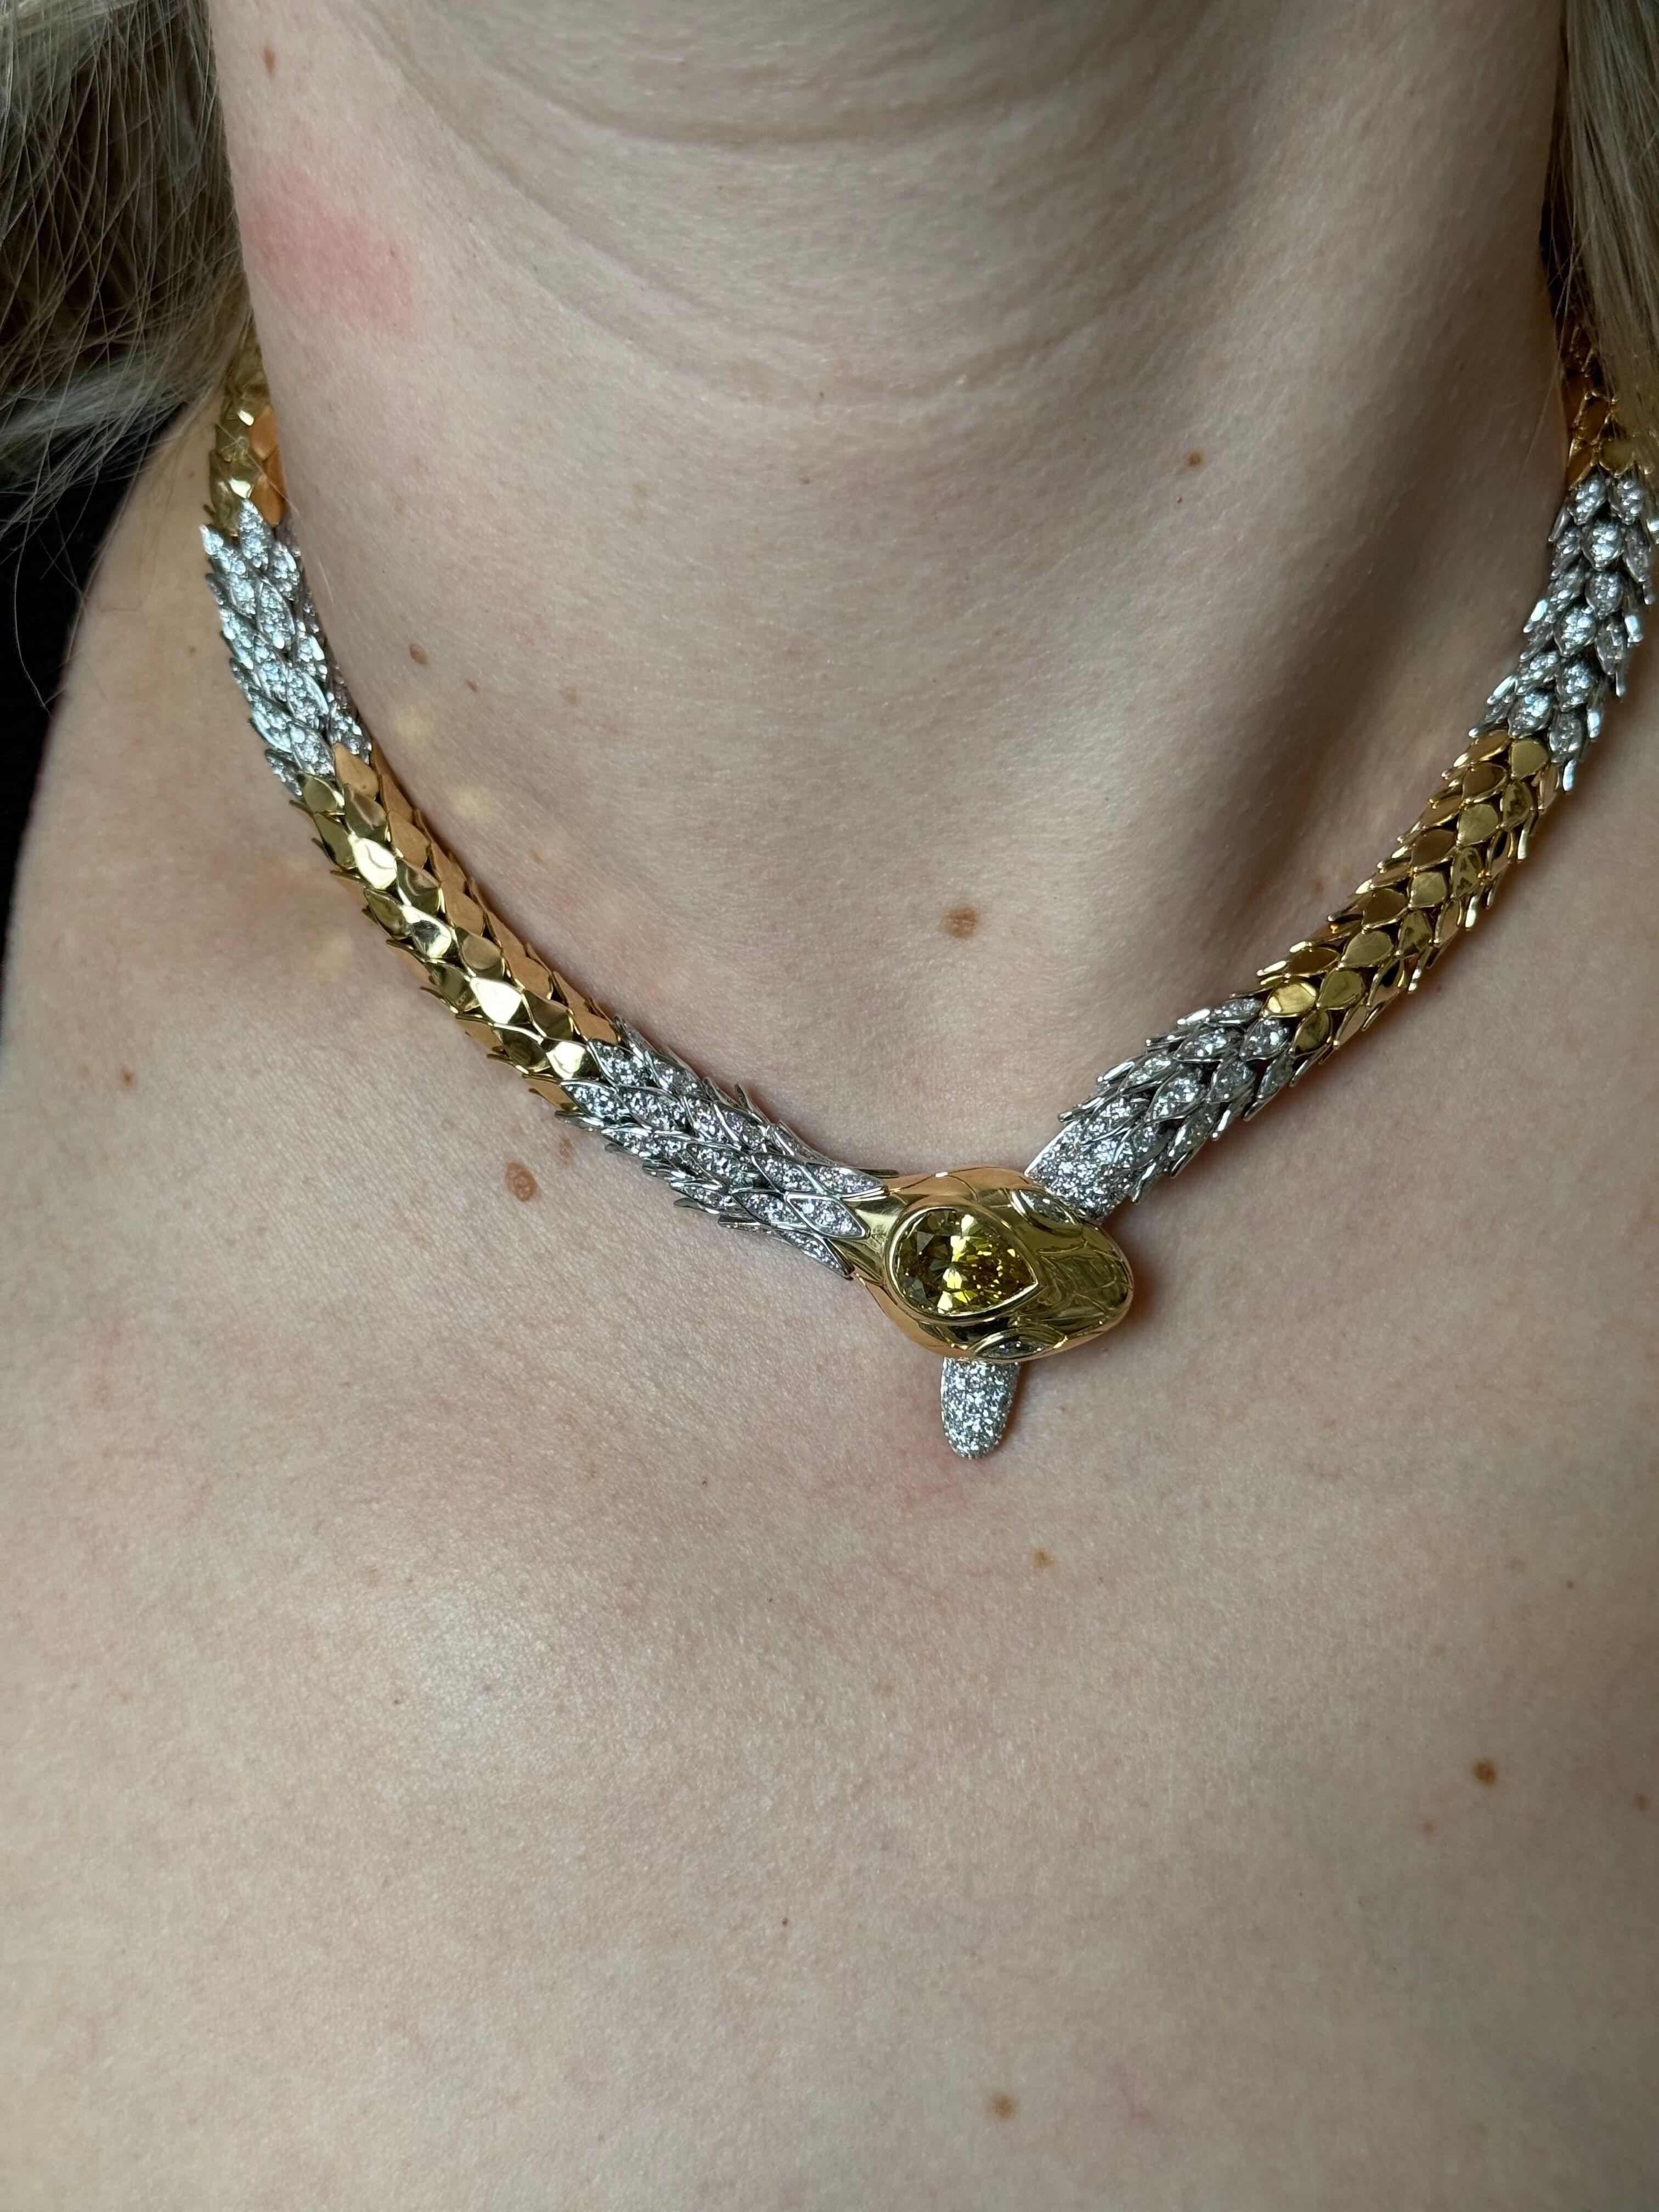 An impressive 18k gold and platinum snake necklace by Faraone, featuring approx. 6.00ctw G/VS diamonds on the necklace, and a center fancy cognac pear shape diamond - approx. 3.60ct VS-Si1. Necklace is 17